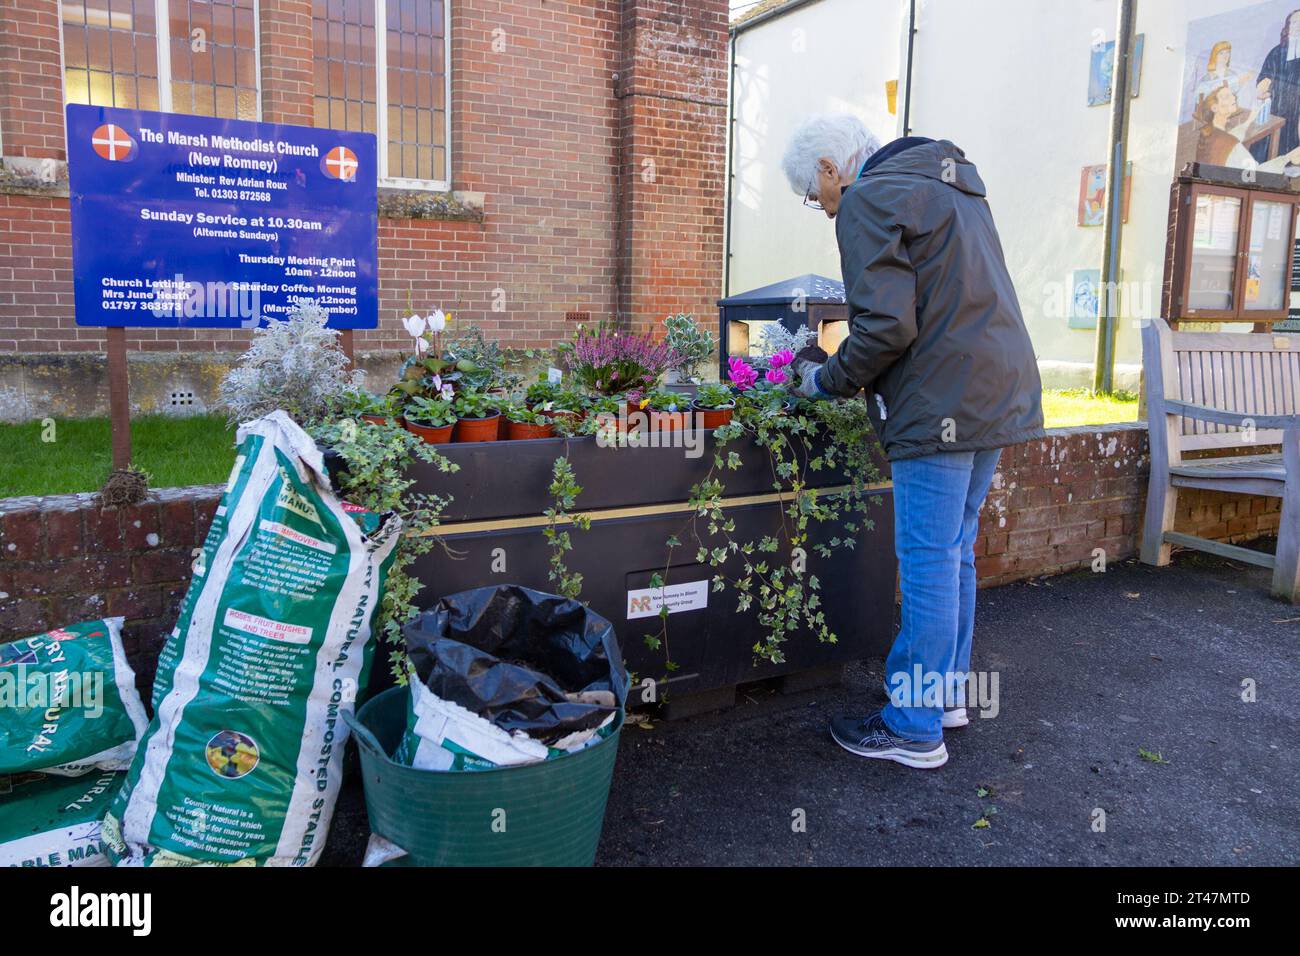 Member of the new romney in bloom community group planting planters on New Romney high street, new romney, kent, uk Stock Photo